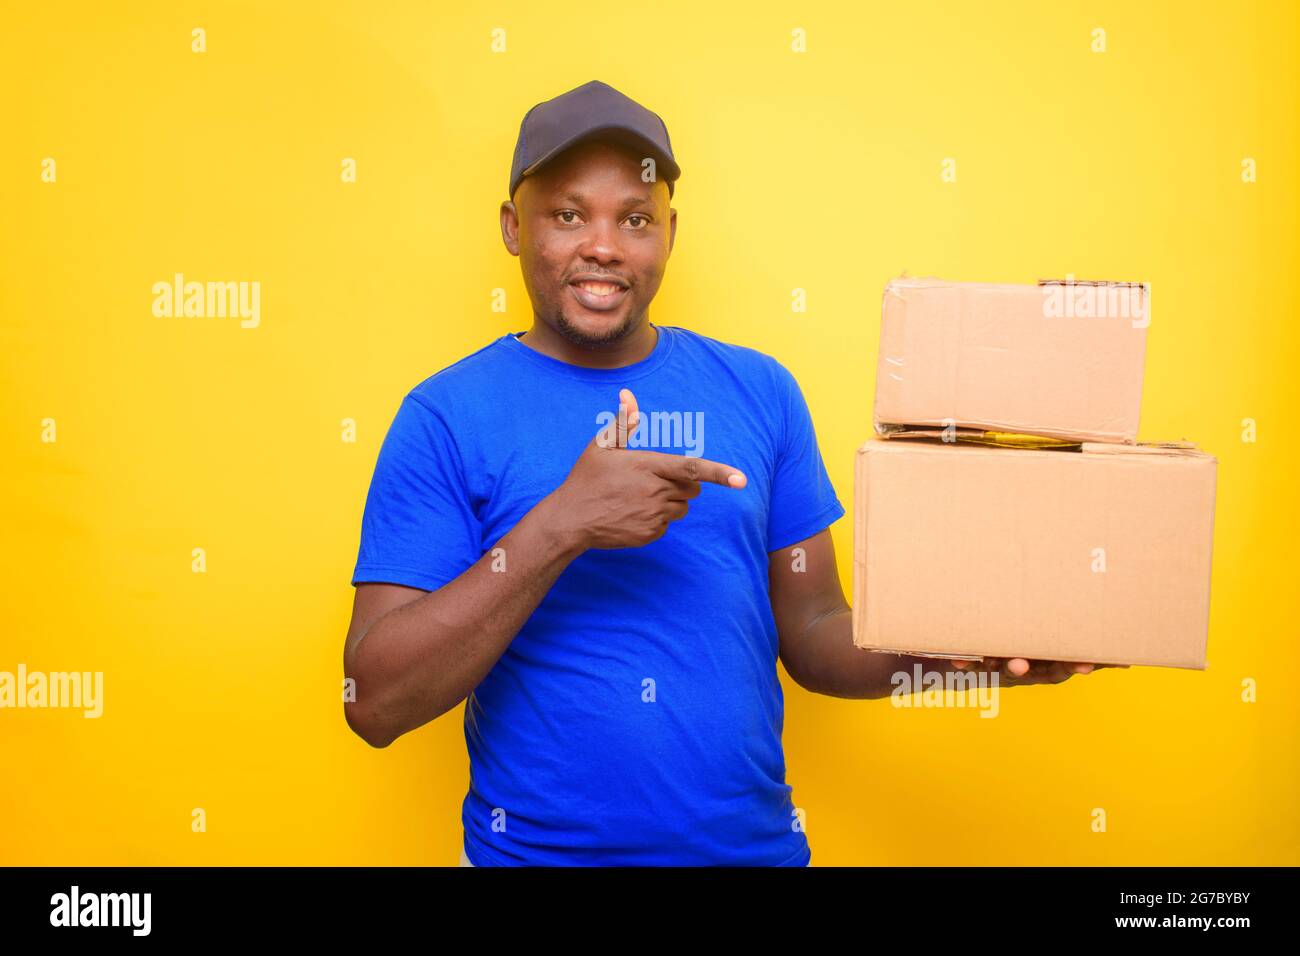 An African dispatch man with face cap and pointing to the boxes he is carrying on his shoulder Stock Photo